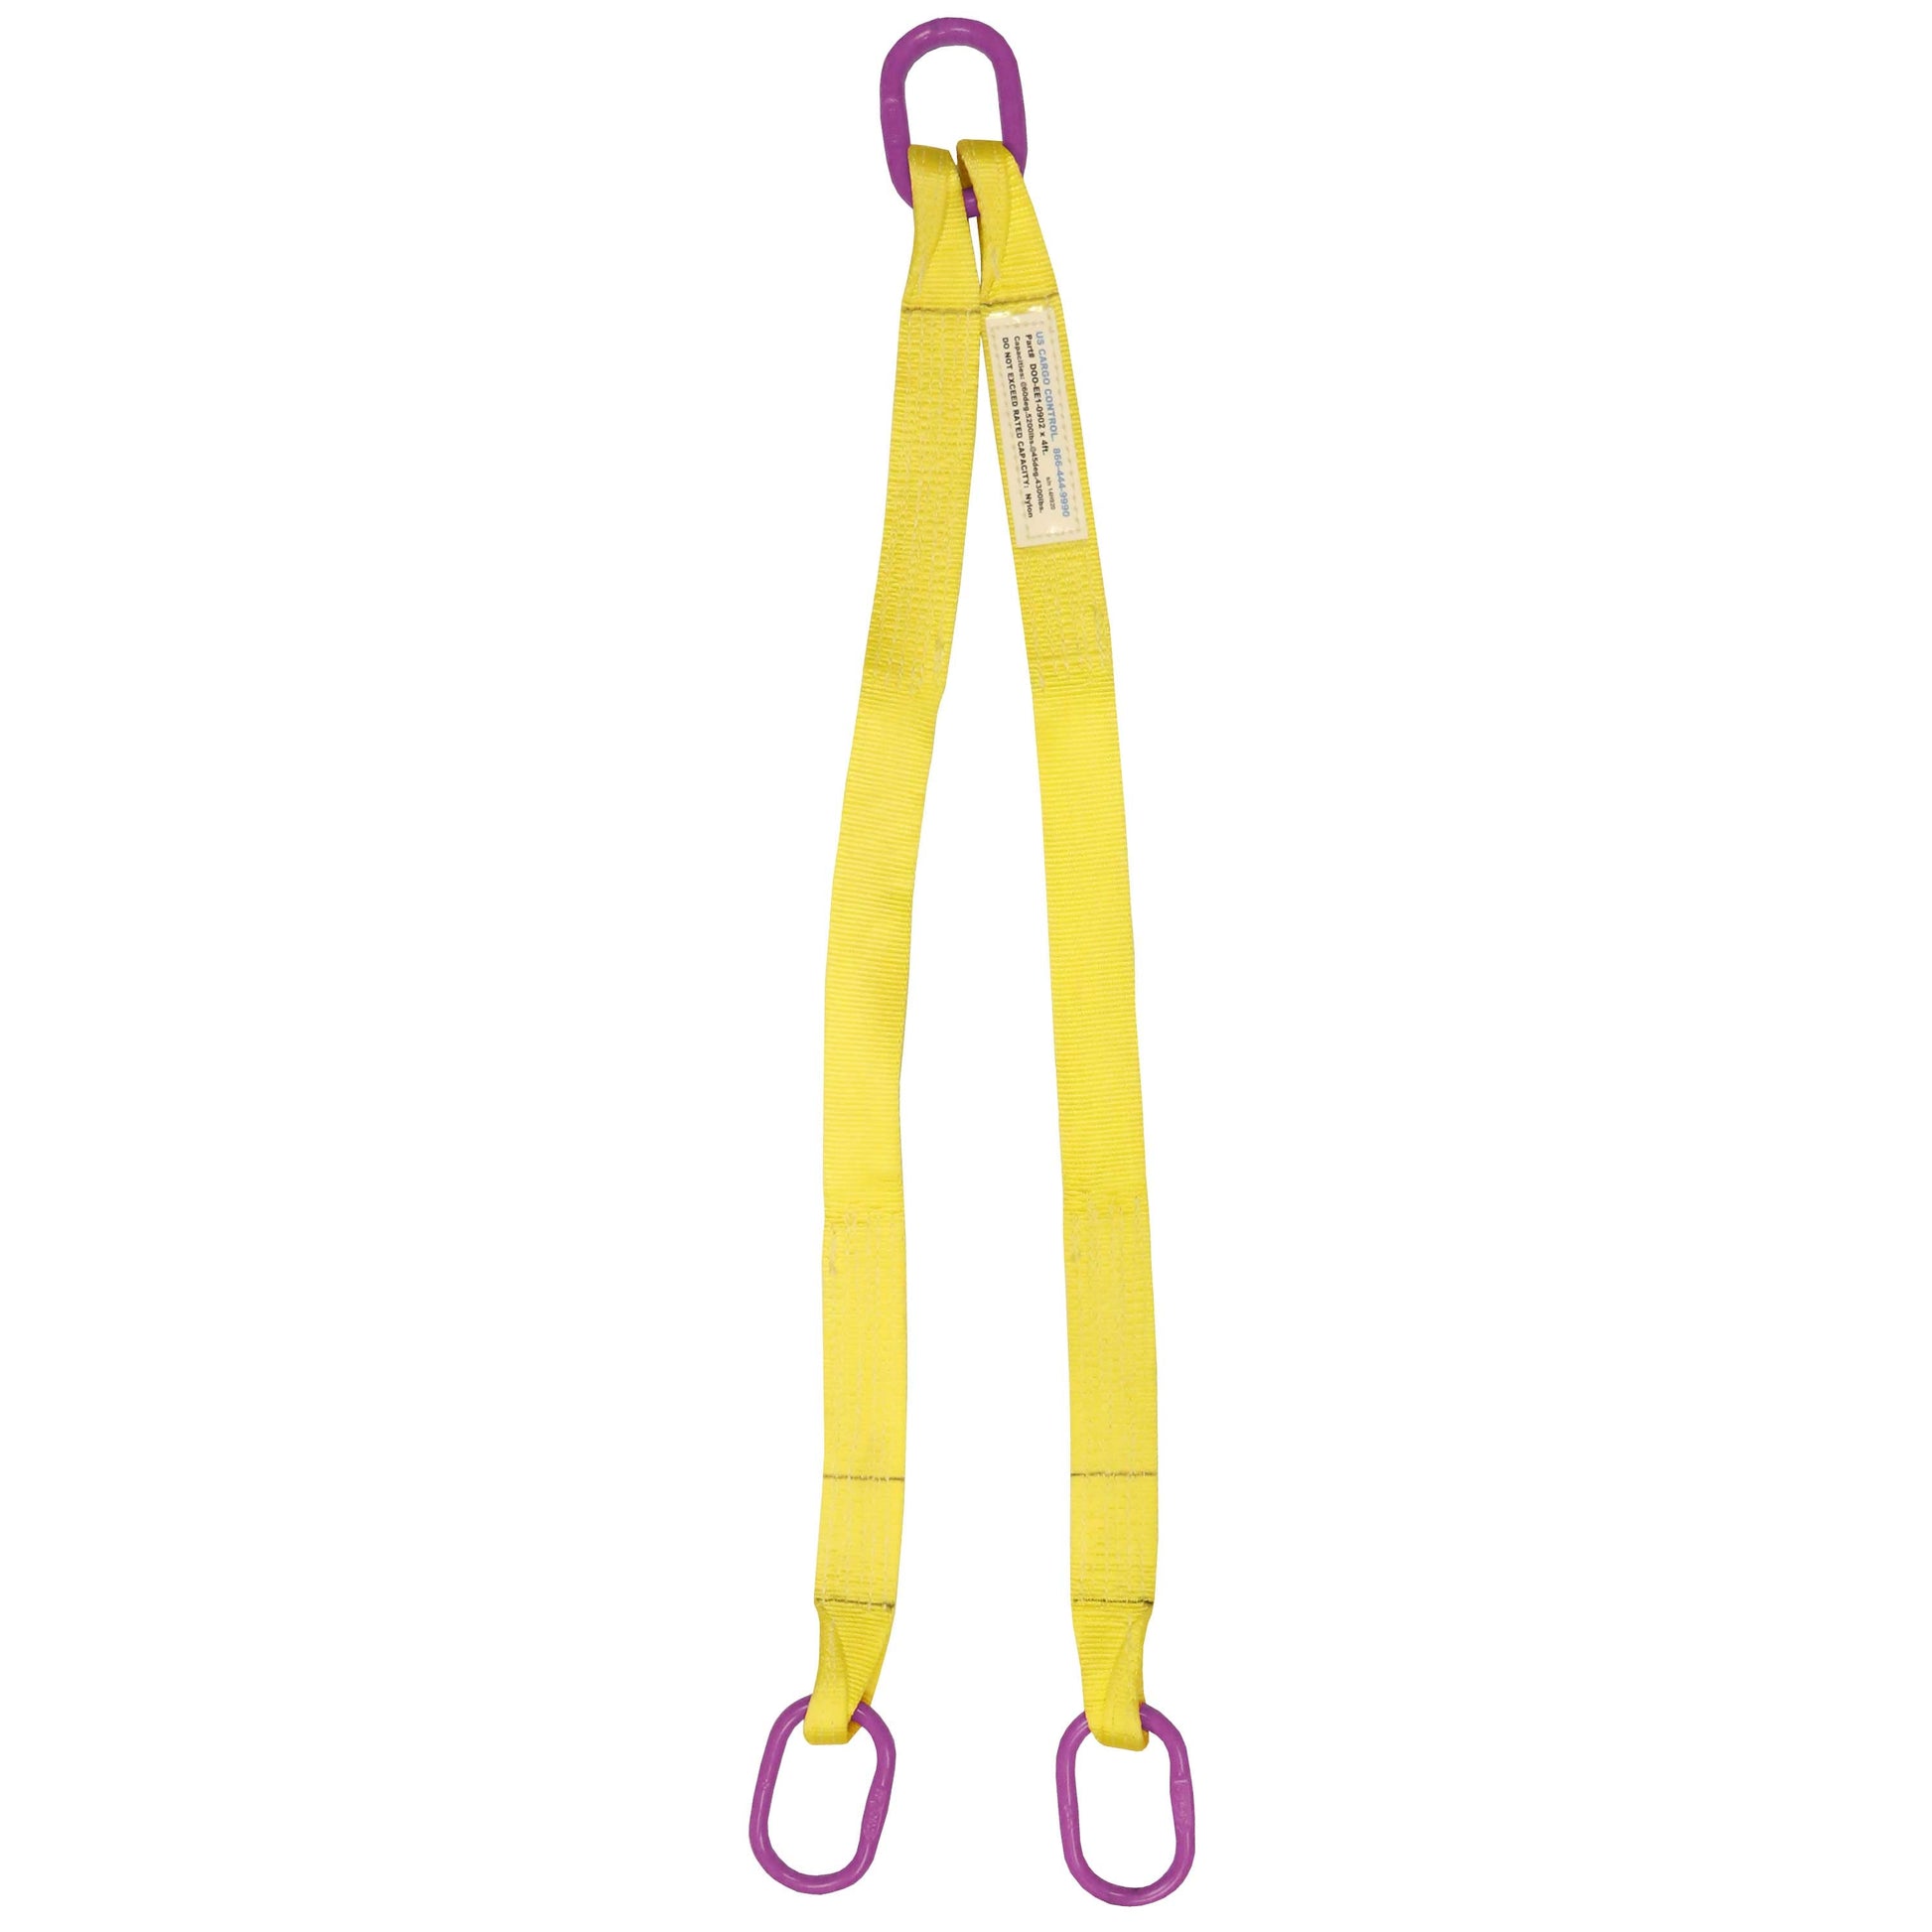 2 inchx16 foot (1 ply) Double Leg Nylon Sling w Master Link Both Ends image